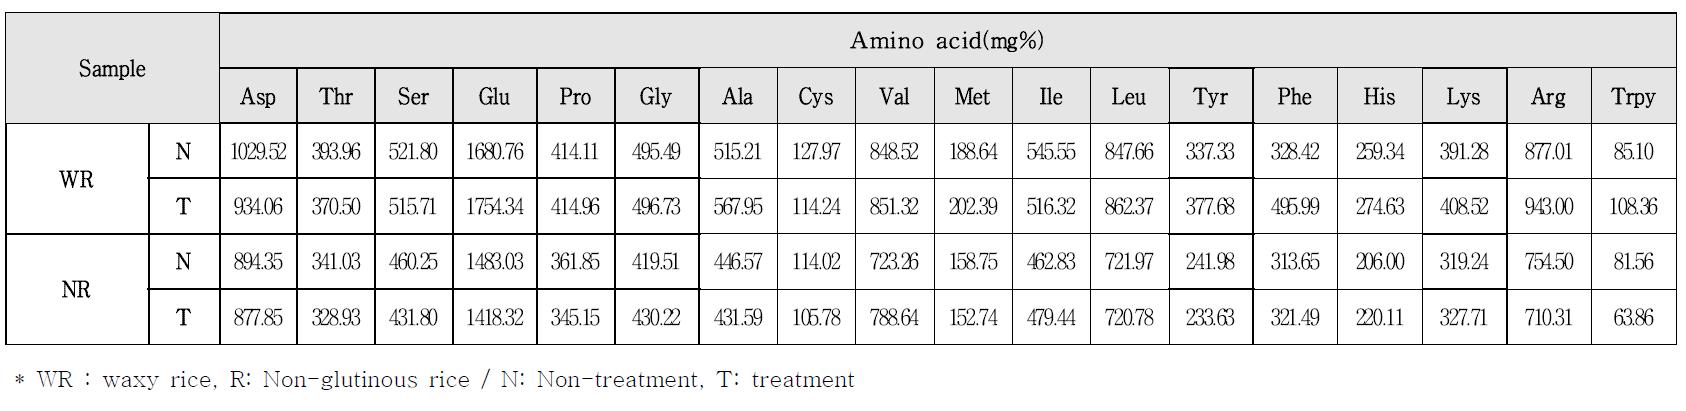 Effect of steeping on amino acid contents of rice for preparation of Olbyeossal from rough rice